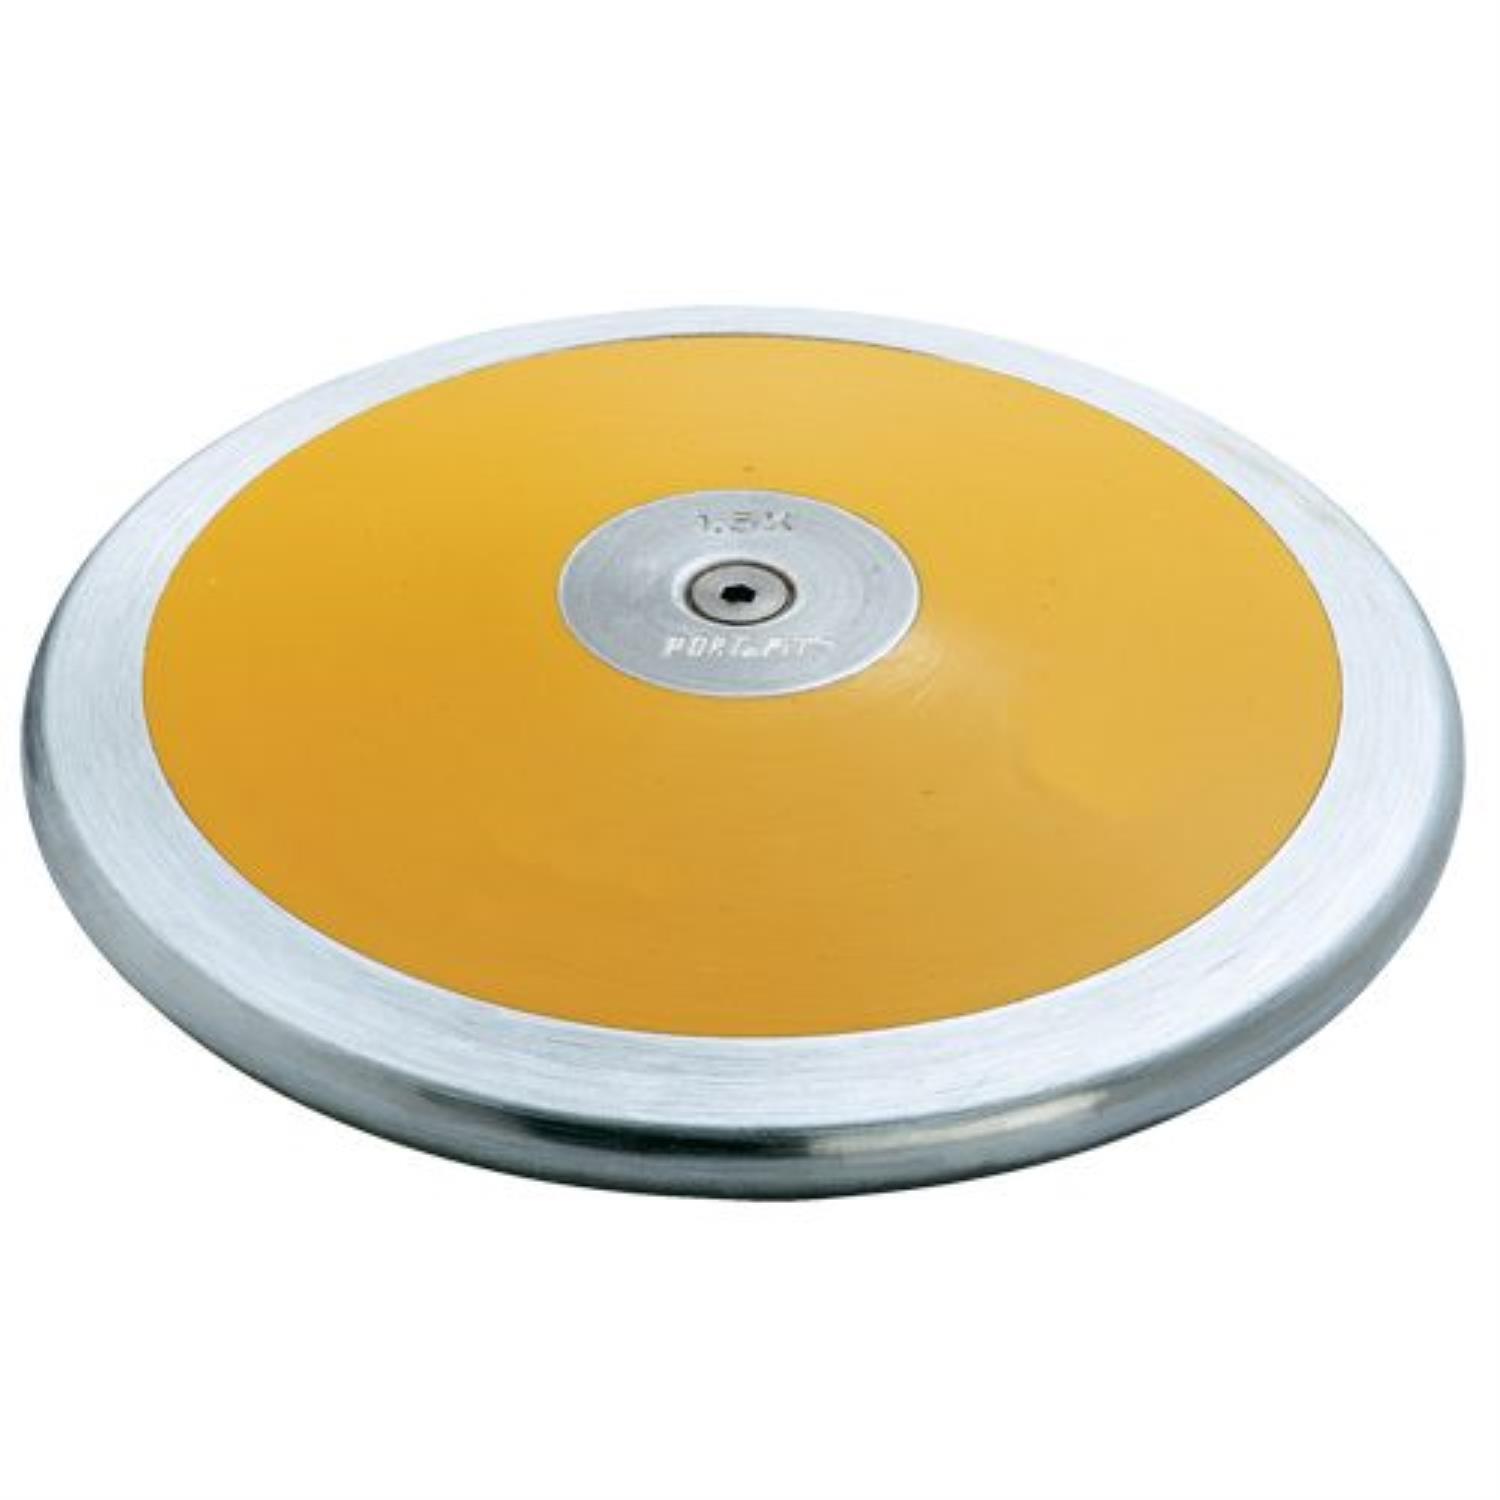 Athletic Connection Gold Lo-Spin Discus ADLS1KGD